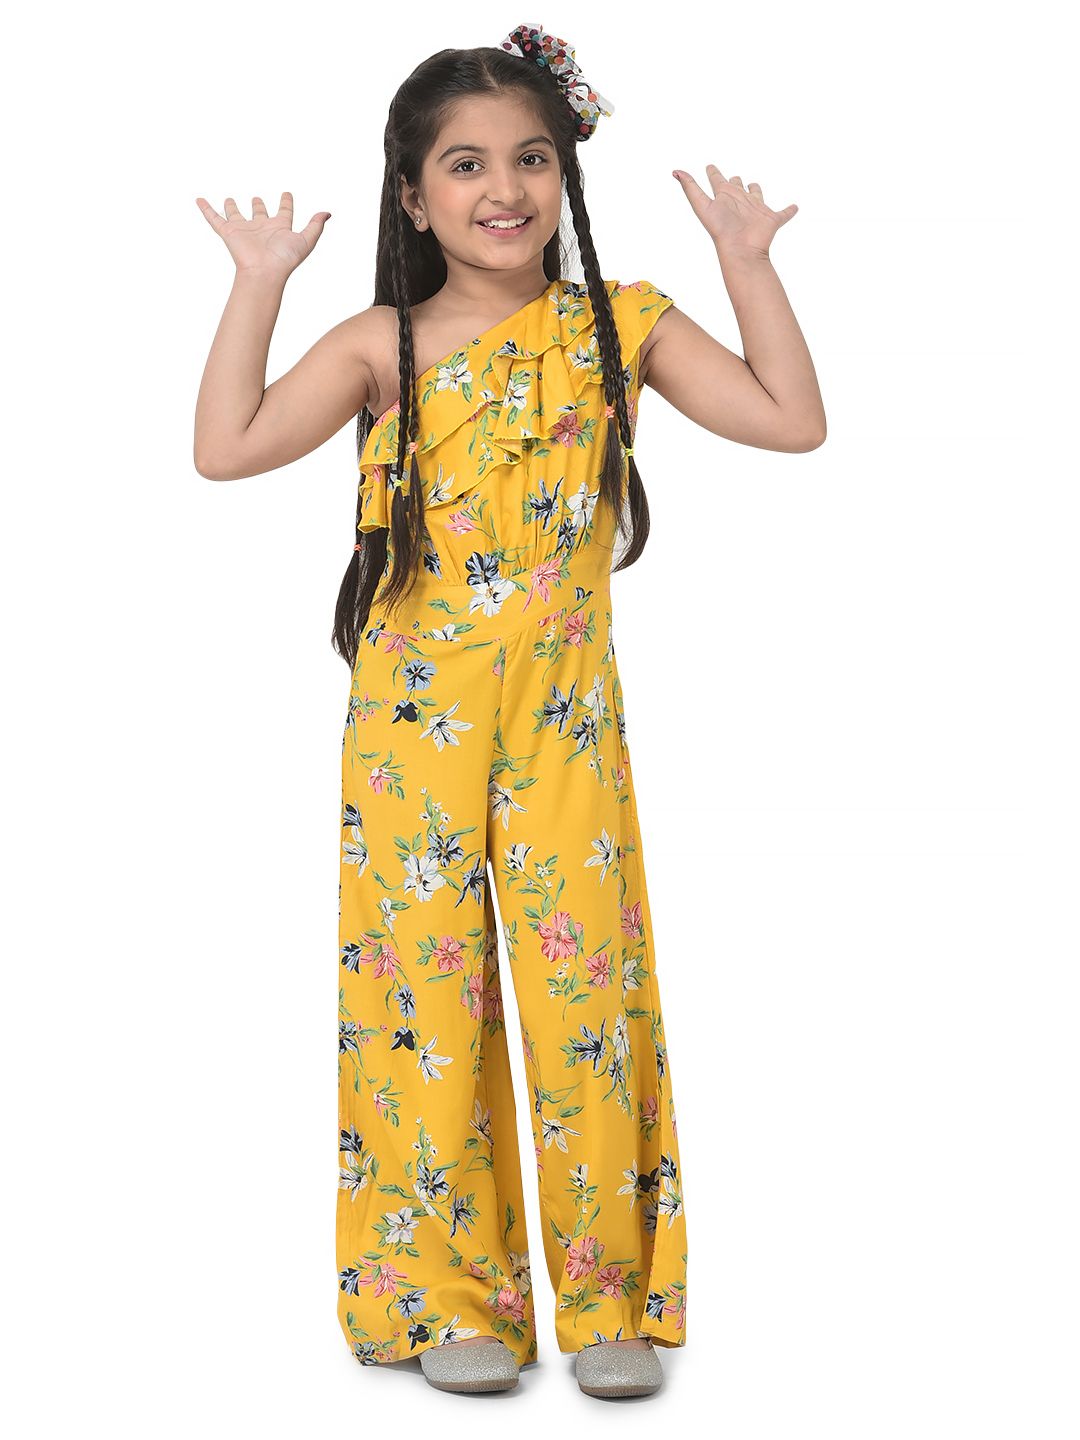 Buy Fashion Girls Jumpsuit Online for 4 - 12 Years Age Group from Cub McPaws